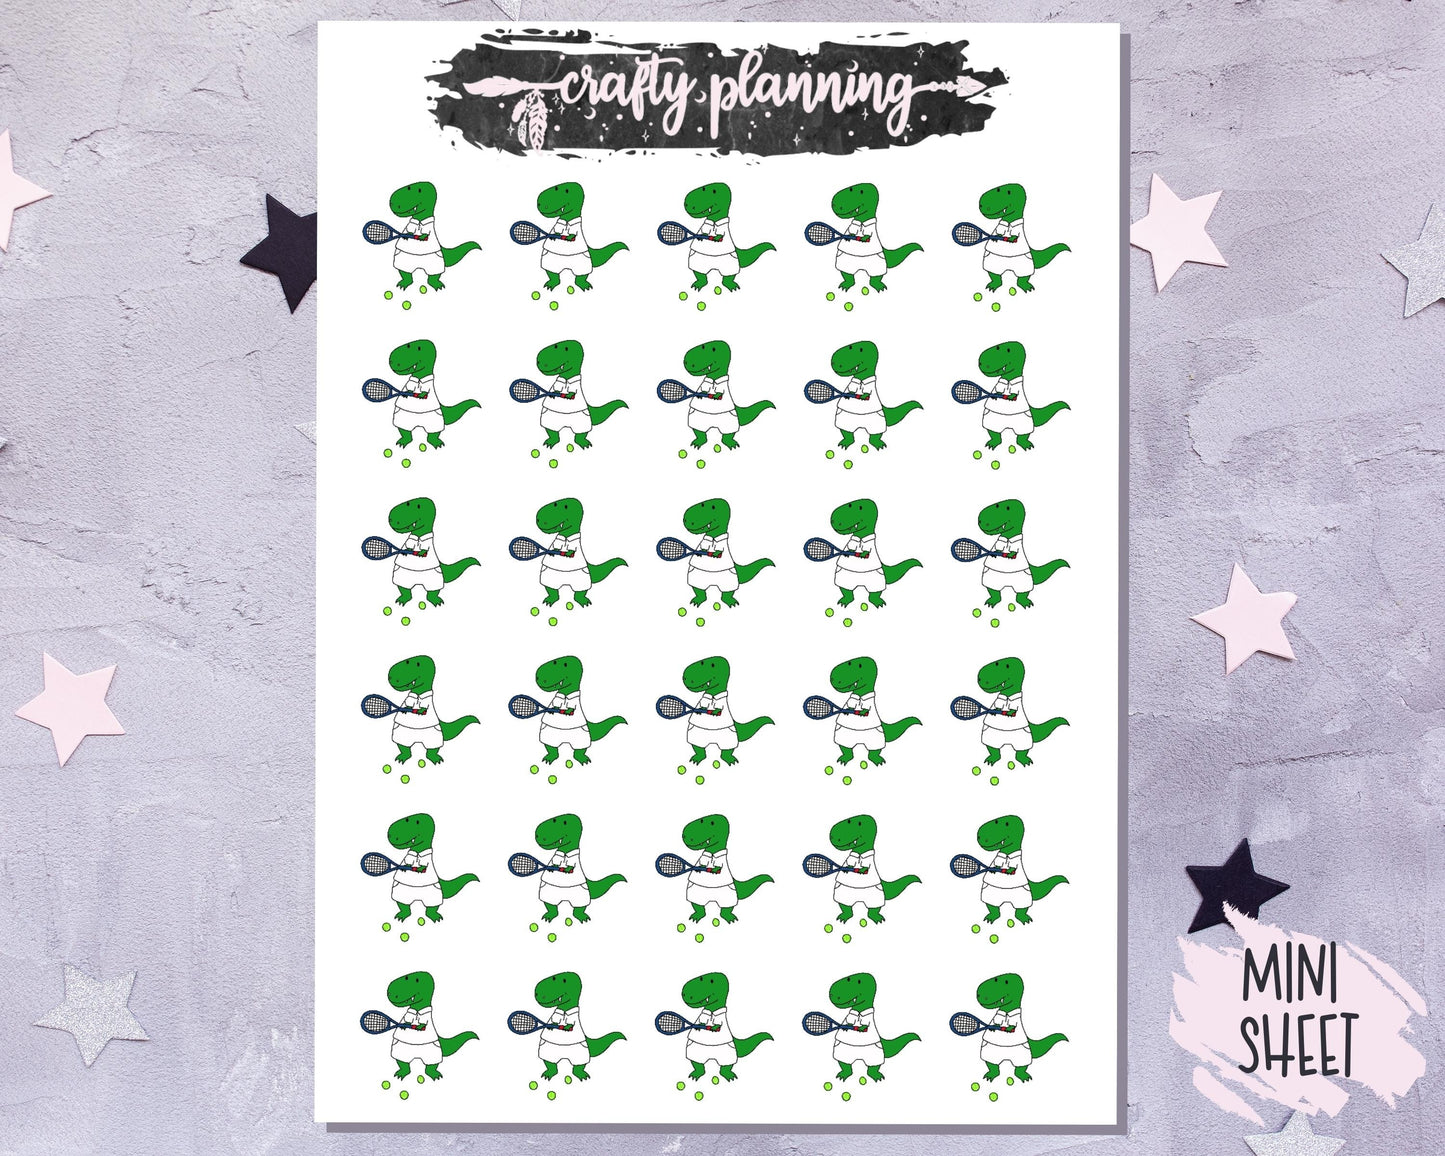 Tennis Stickers, Dinosaur Stickers, Character Stickers, Planner Stickers, Hand Drawn Stickers, Sport Stickers, Hobby Stickers